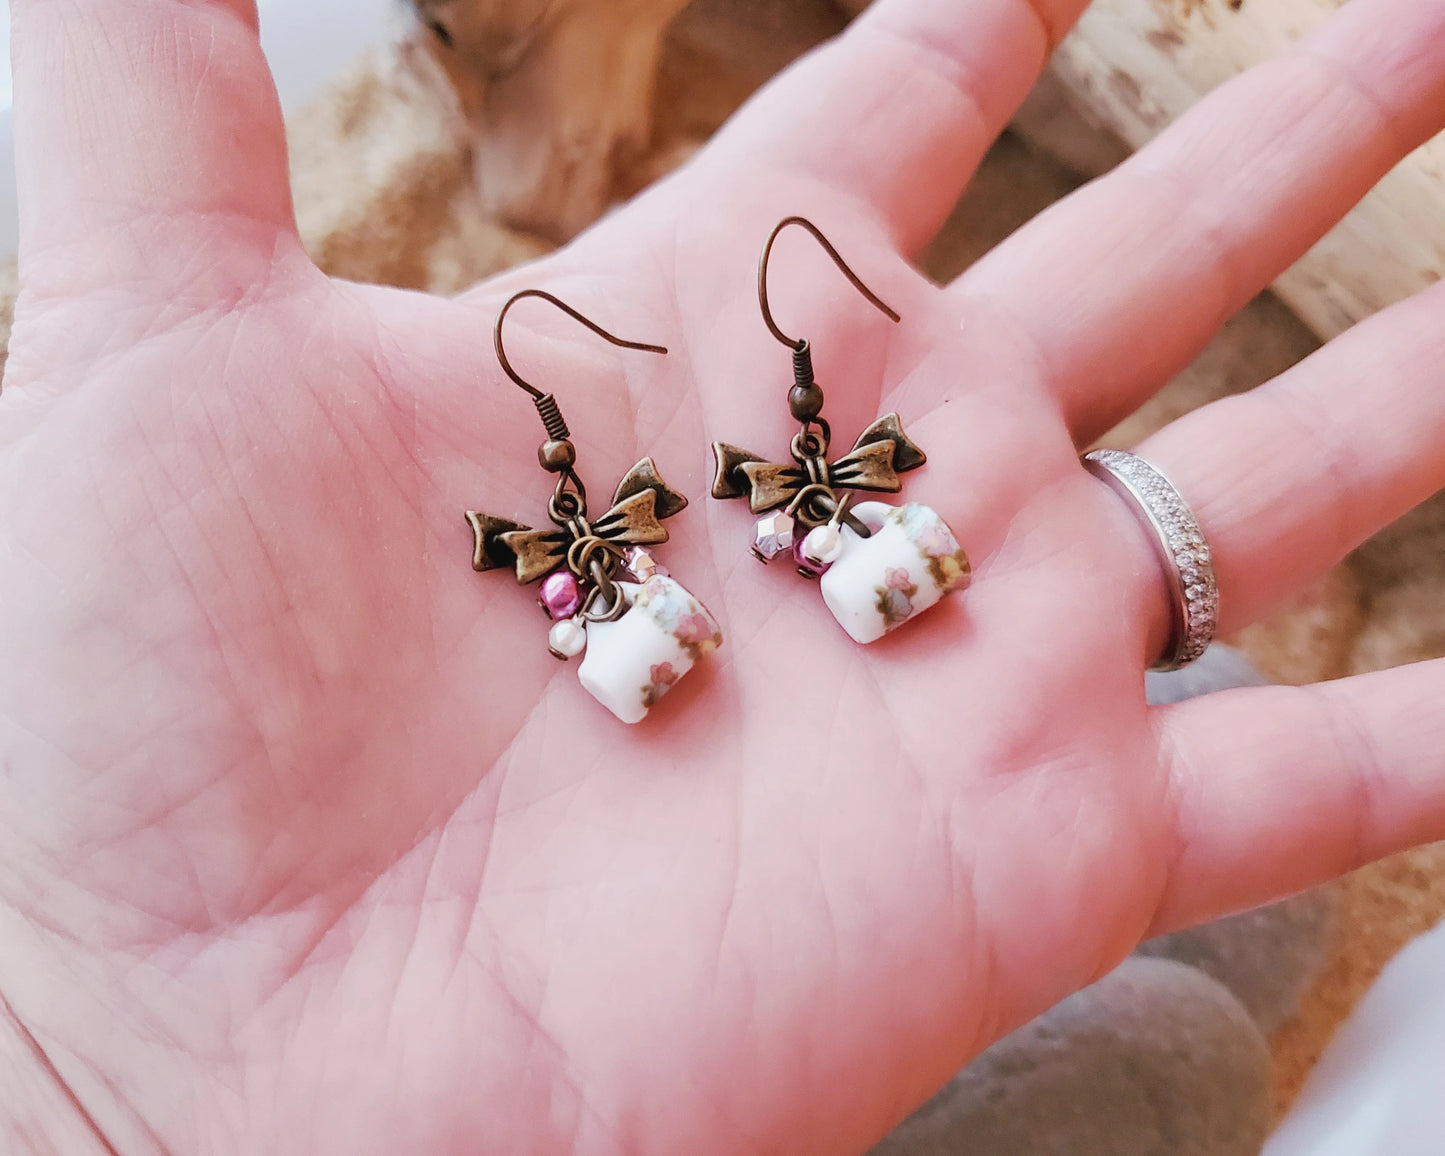 Shabby Chic, Vintage Coffee Cup Earrings displayed on Hand